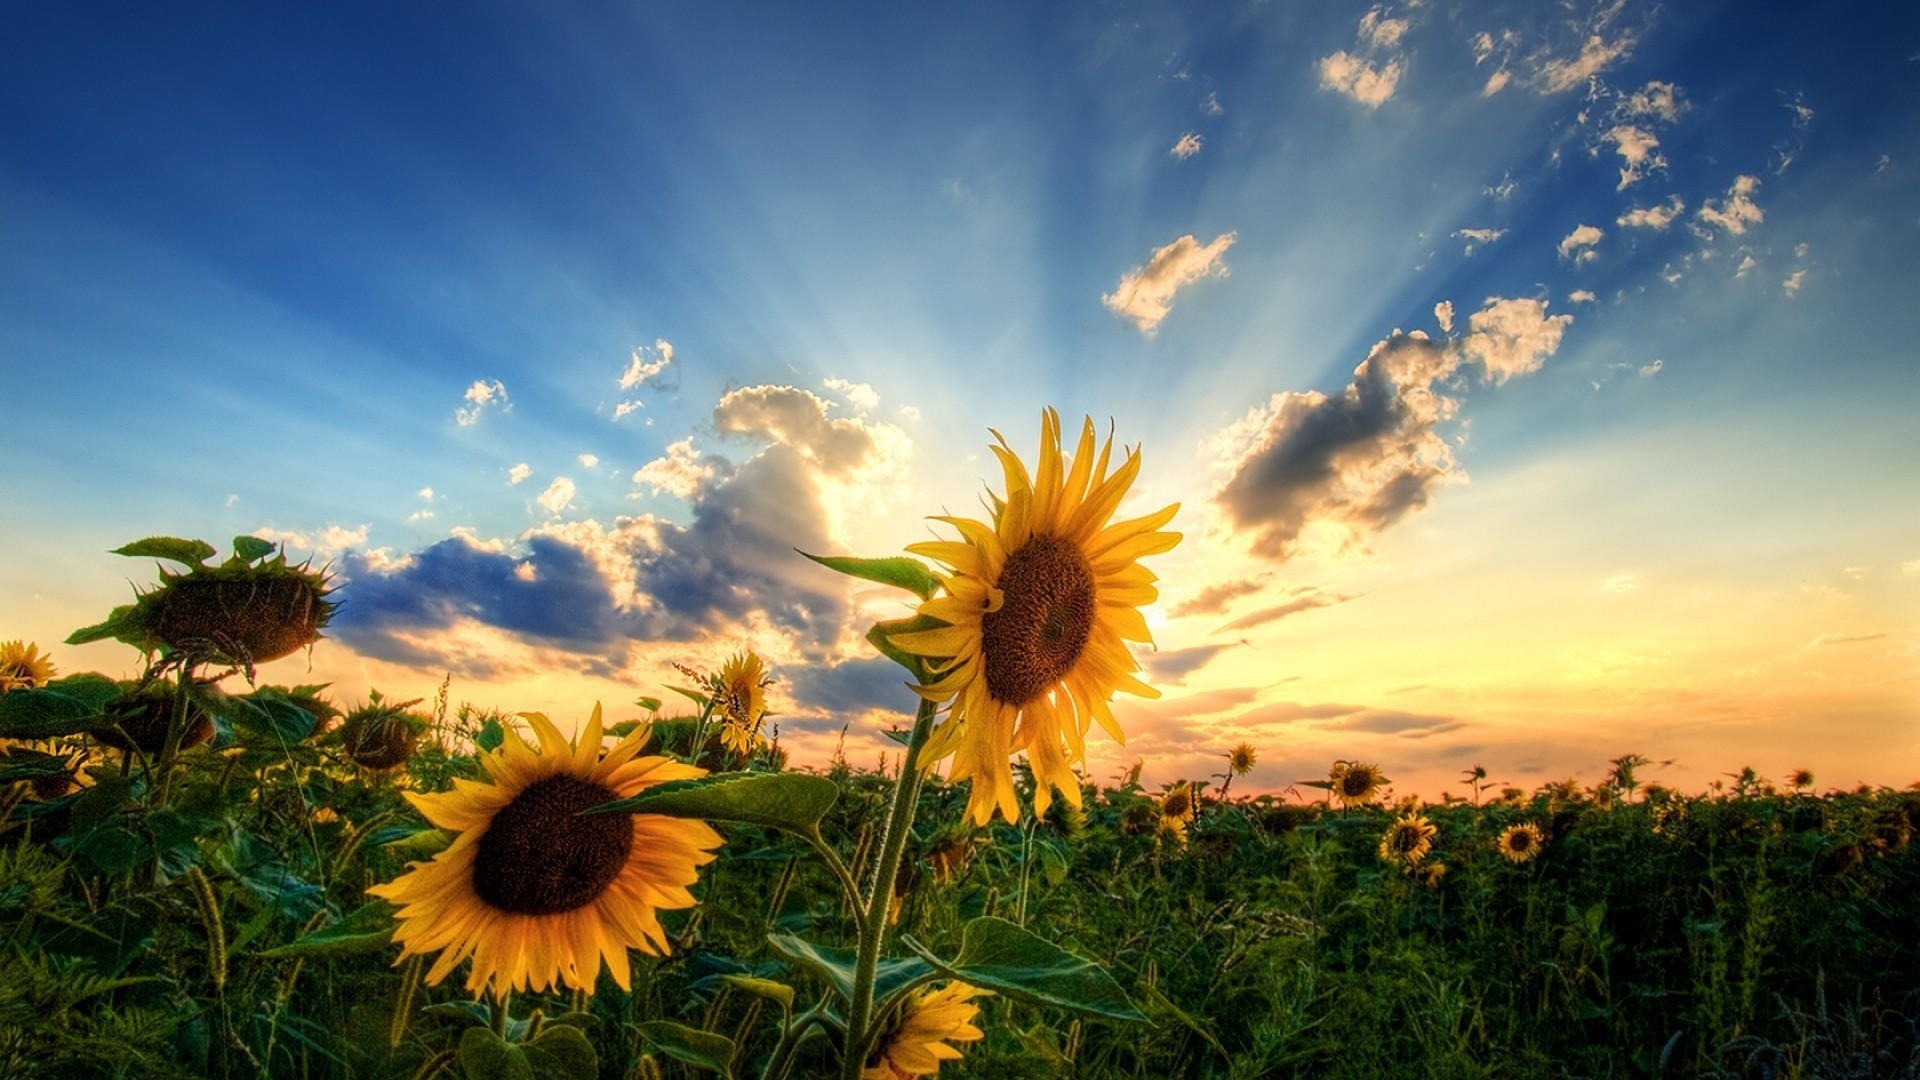 1920x1080 Sunflower Wallpapers Hd Resolution Is Cool Wallpapers